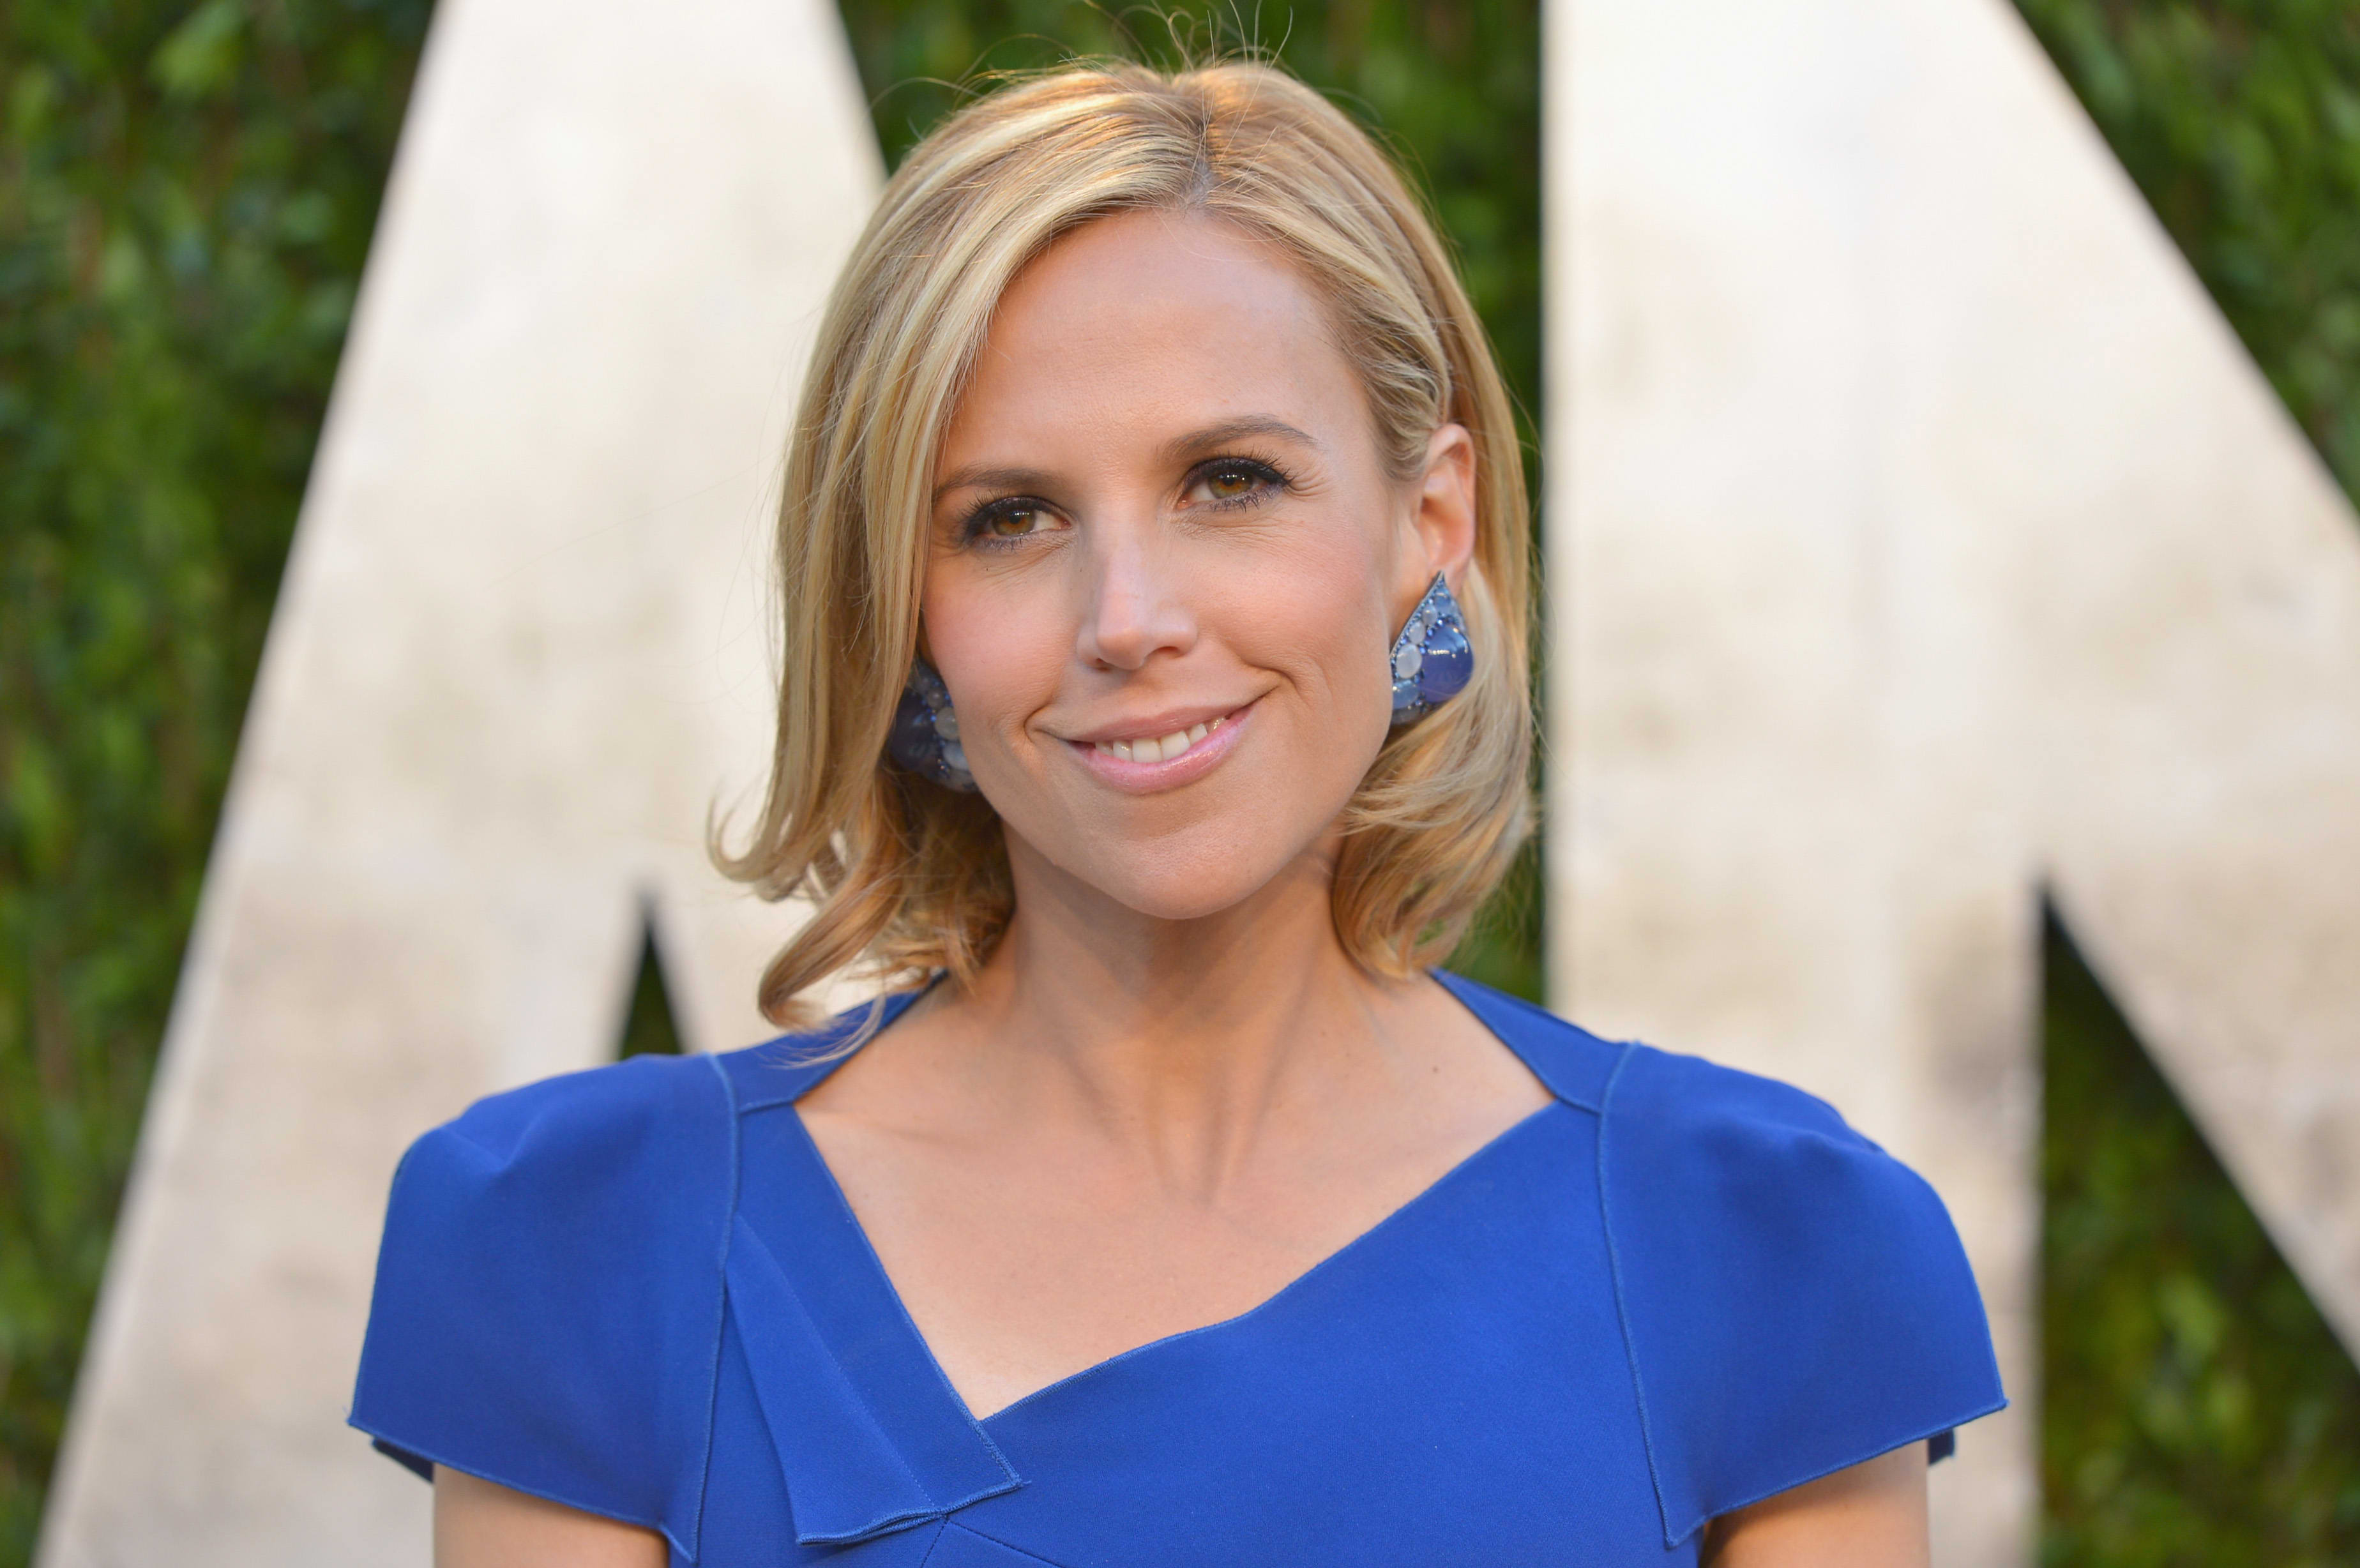 Tory Burch: Expand in China slowly, strategically